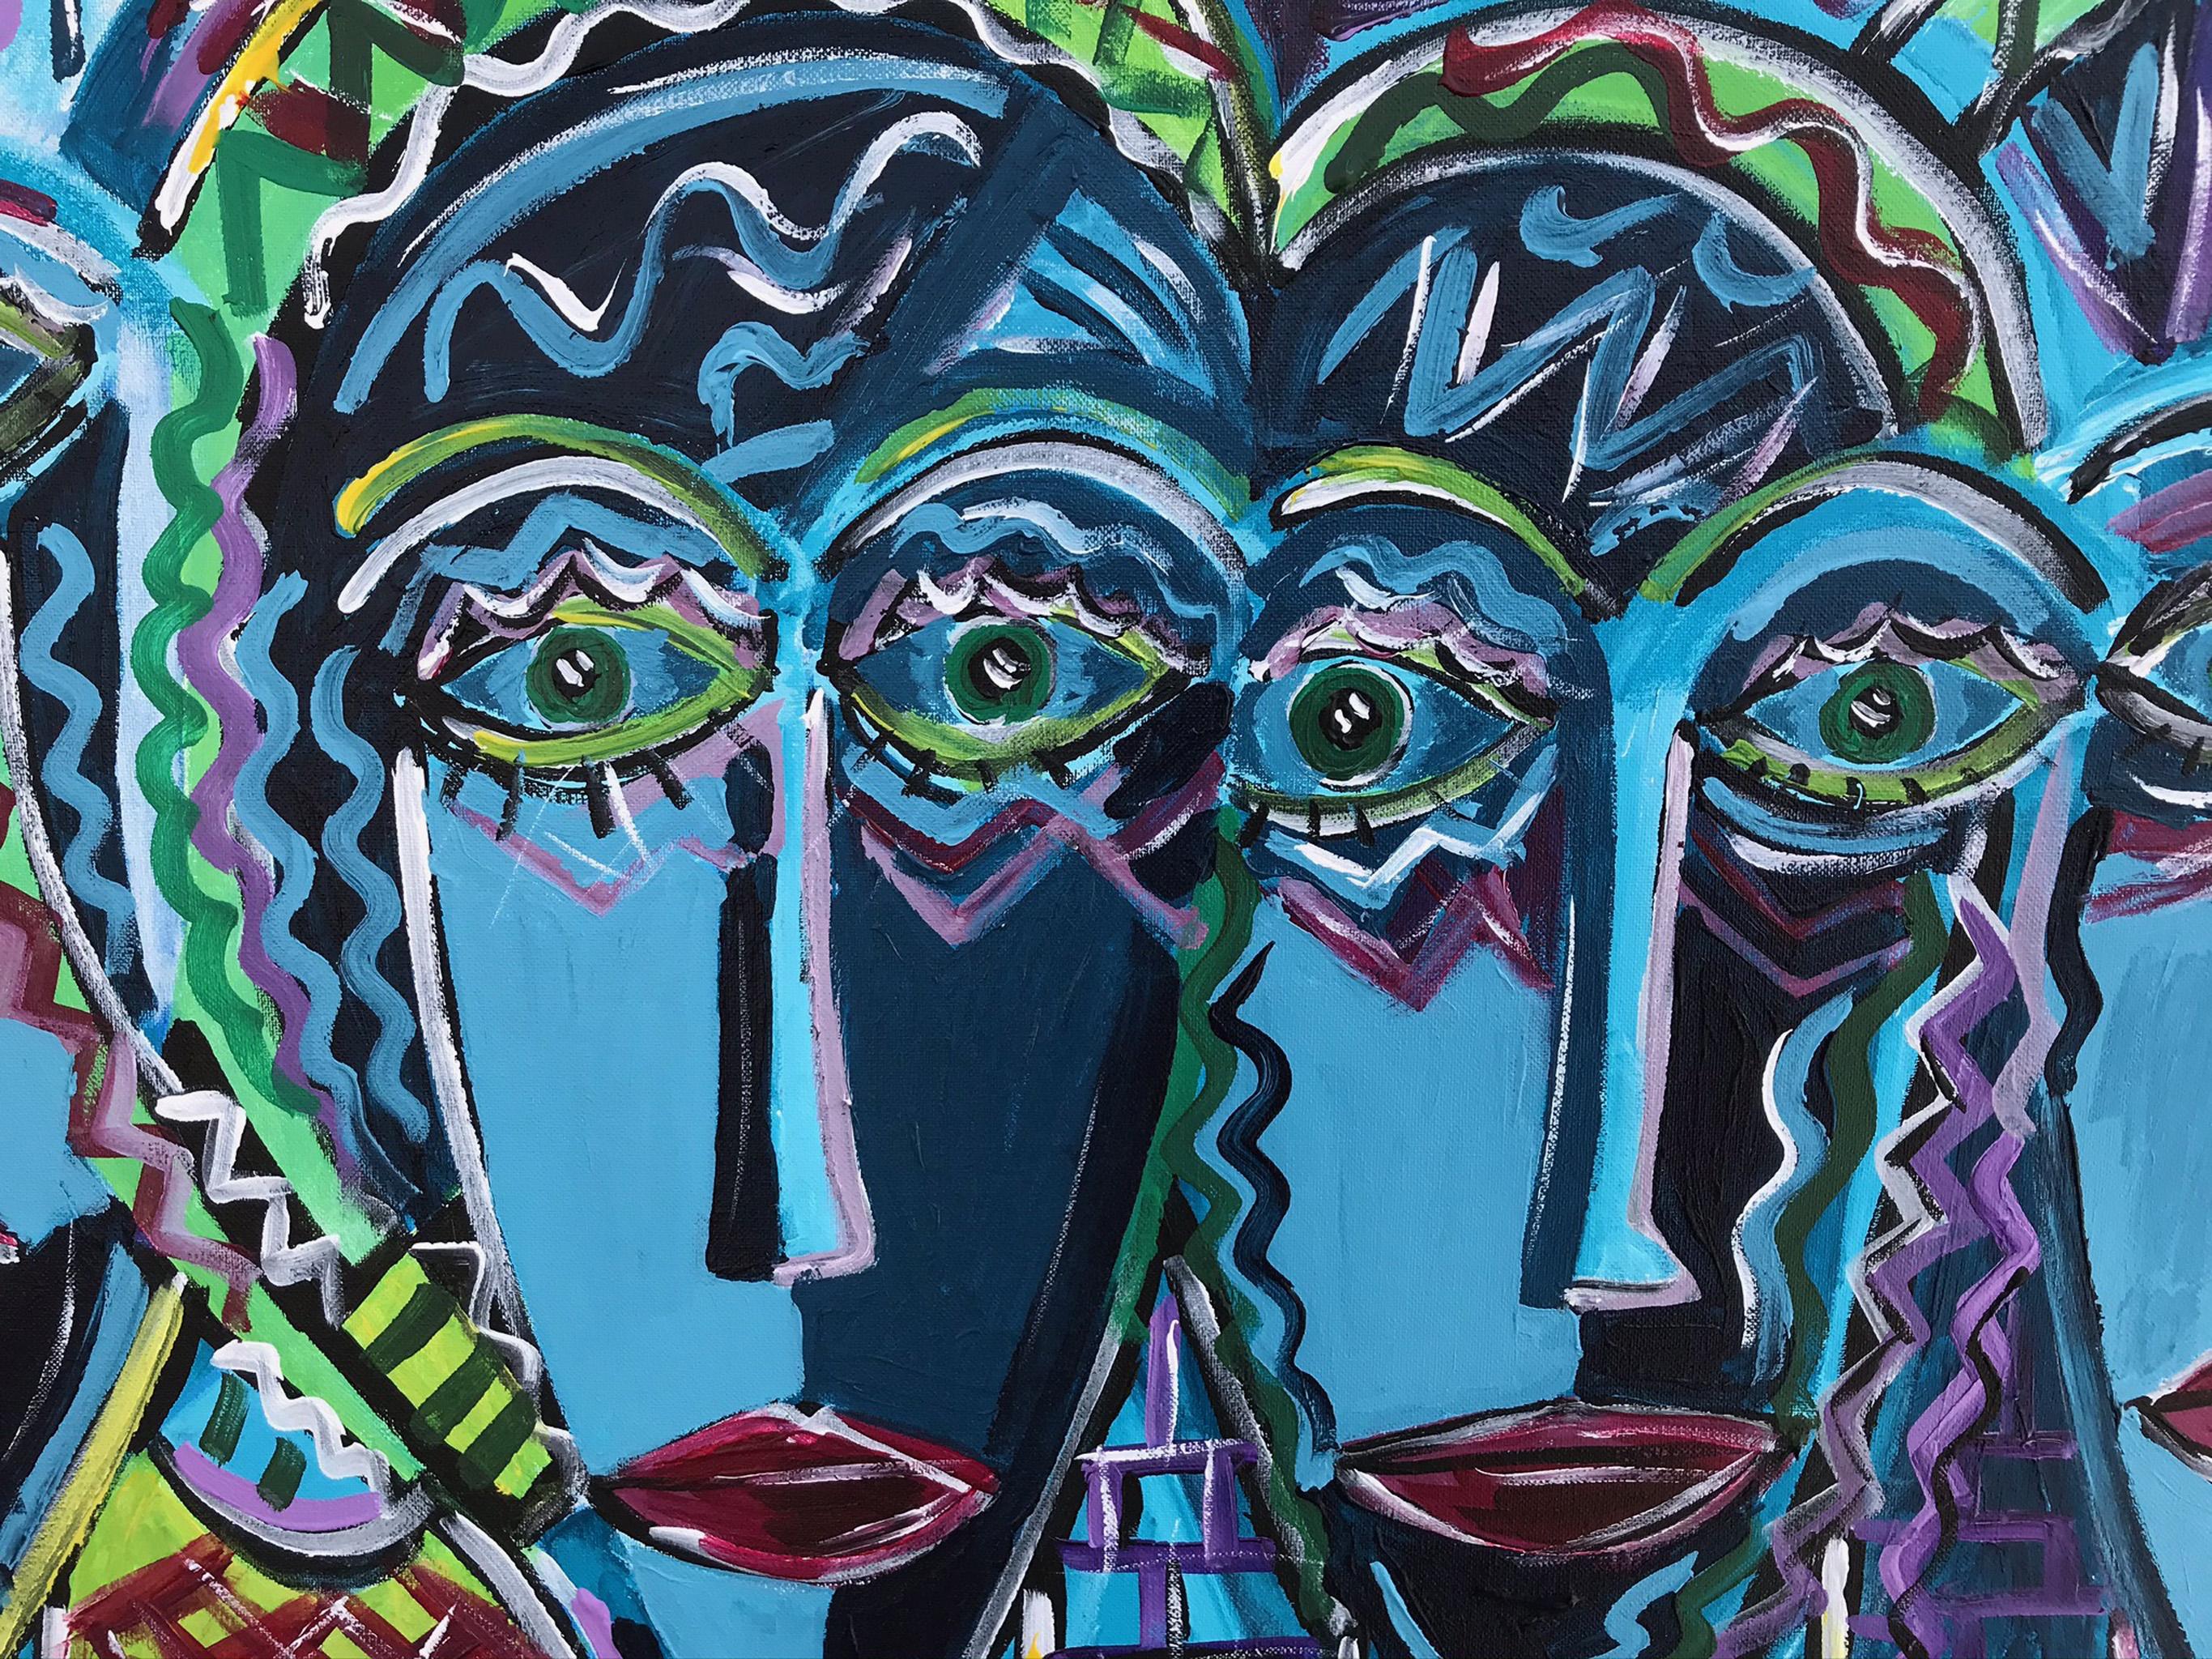  R. Poch. Figures  Faces  Blue   acrylic painting - Contemporary Painting by Ramon Poch